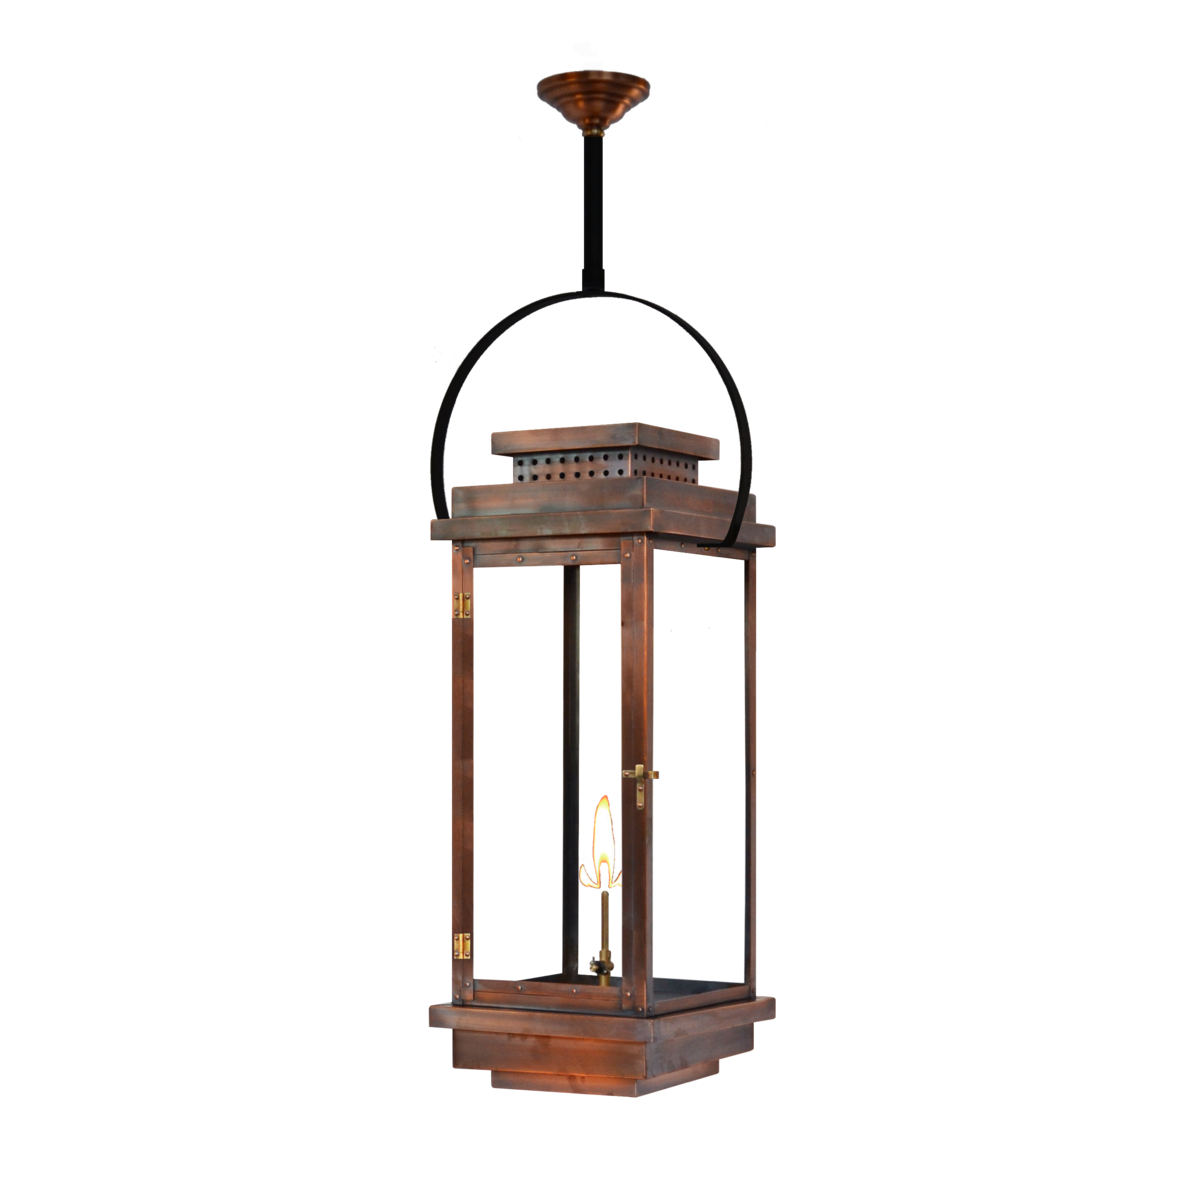 The CopperSmith Contempo Collection-Gas and Electric Contempo Electric, Gas  or Patented LED Flame Lantern CO & FCO Contempo